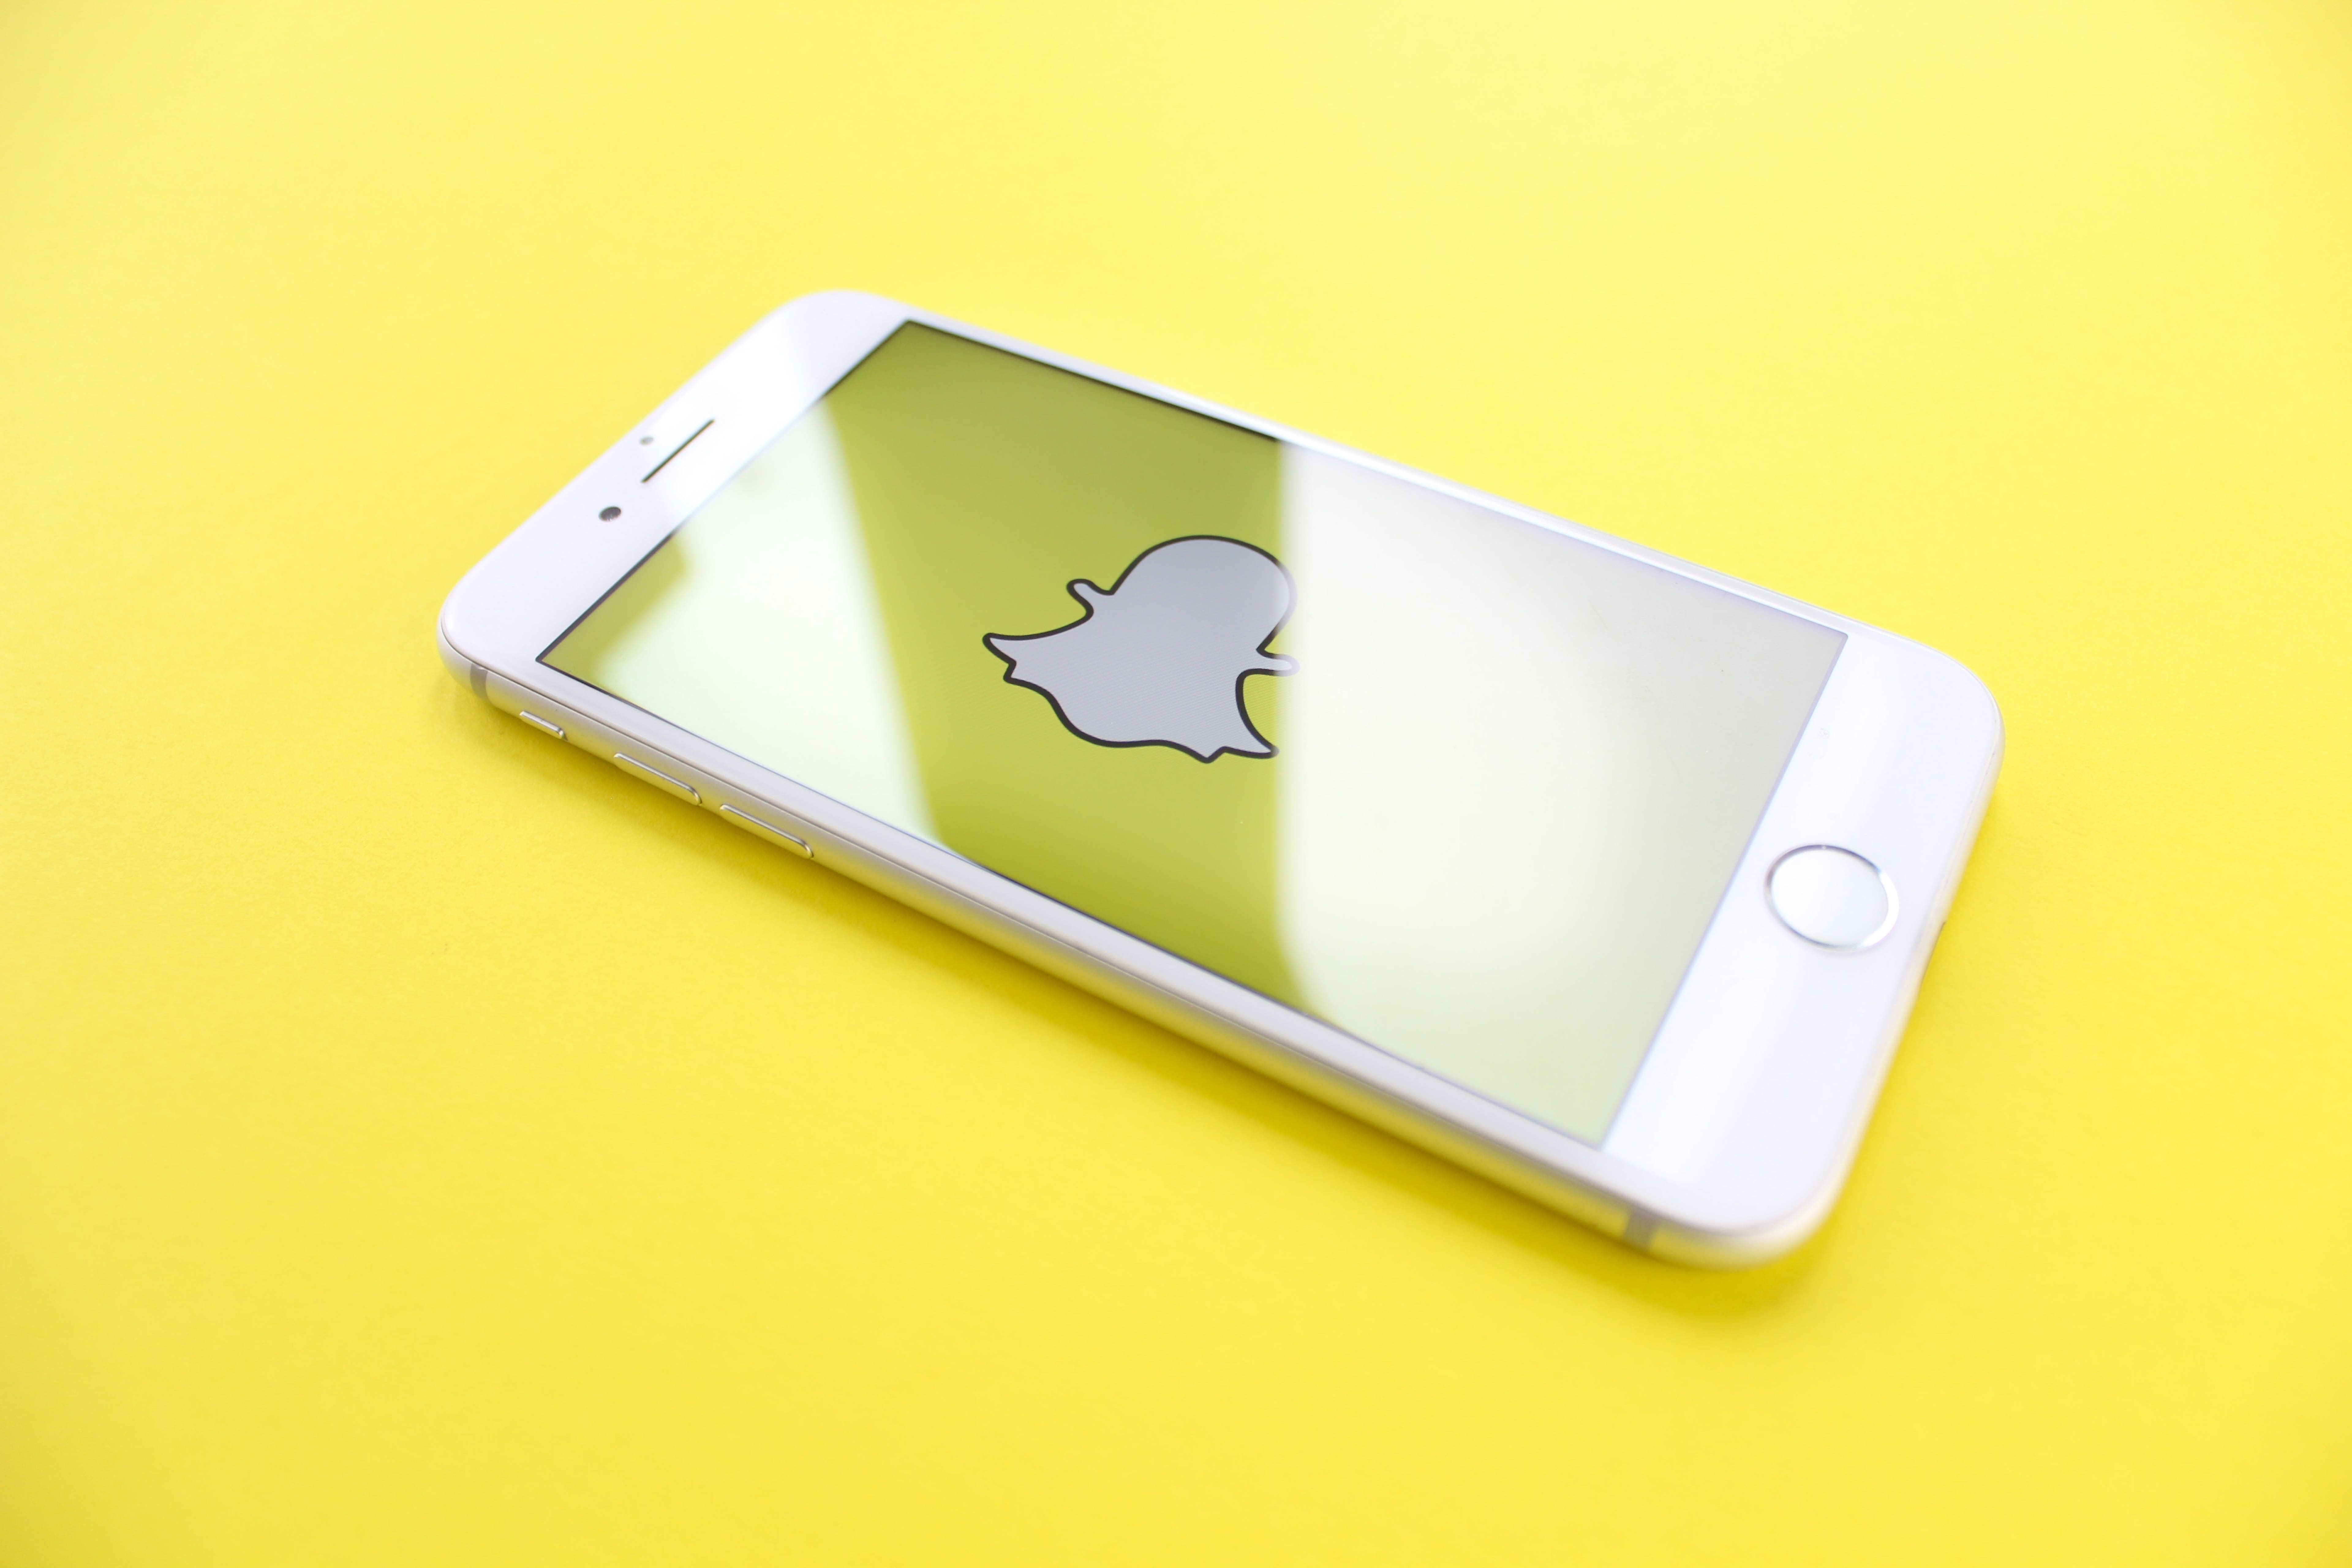 Snap Shares Attract More Bullish Bets, Traders Expect Stock To Remain Above This Price